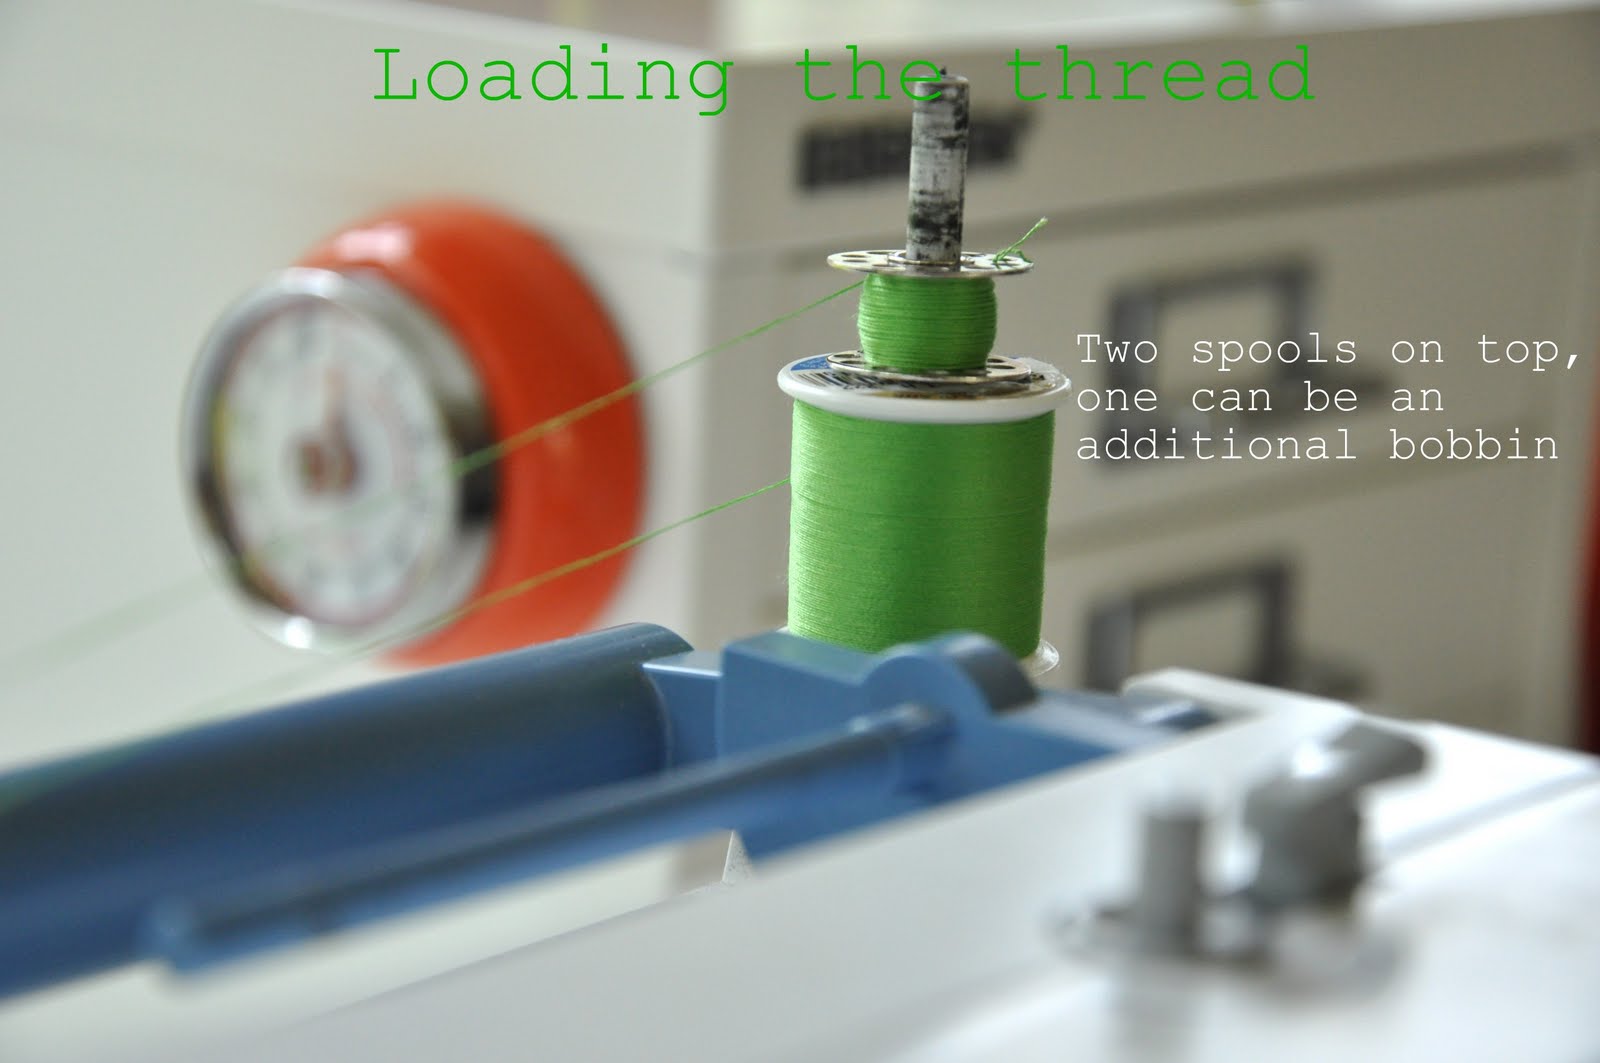 Using the Double Needle, WITHOUT the 2nd spool holder